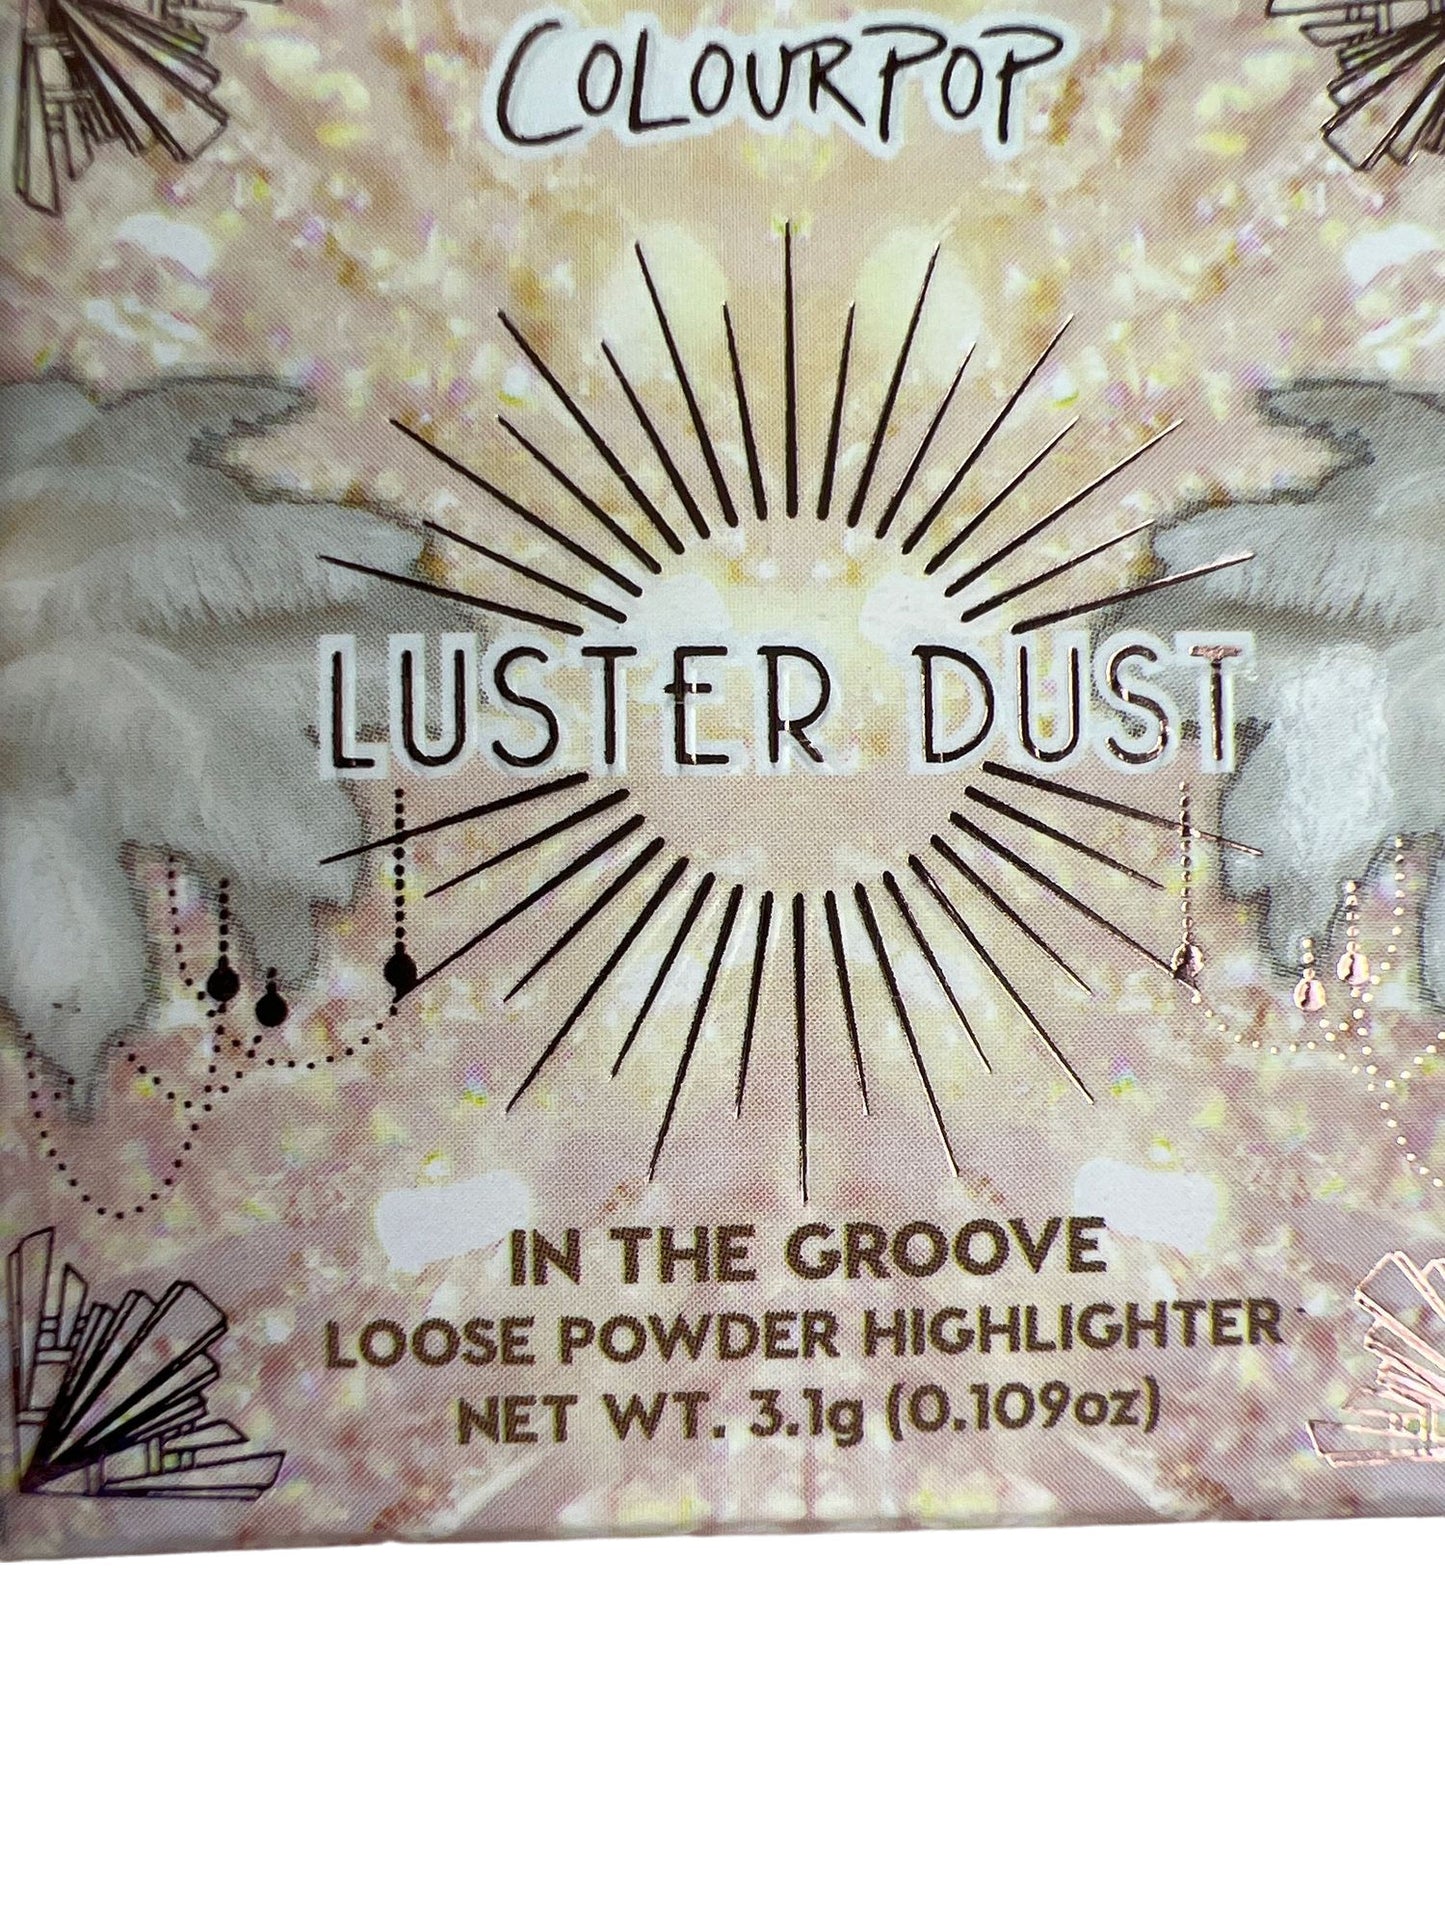 Colourpop Luster Dust Loose Powder Highlighter In The Groove